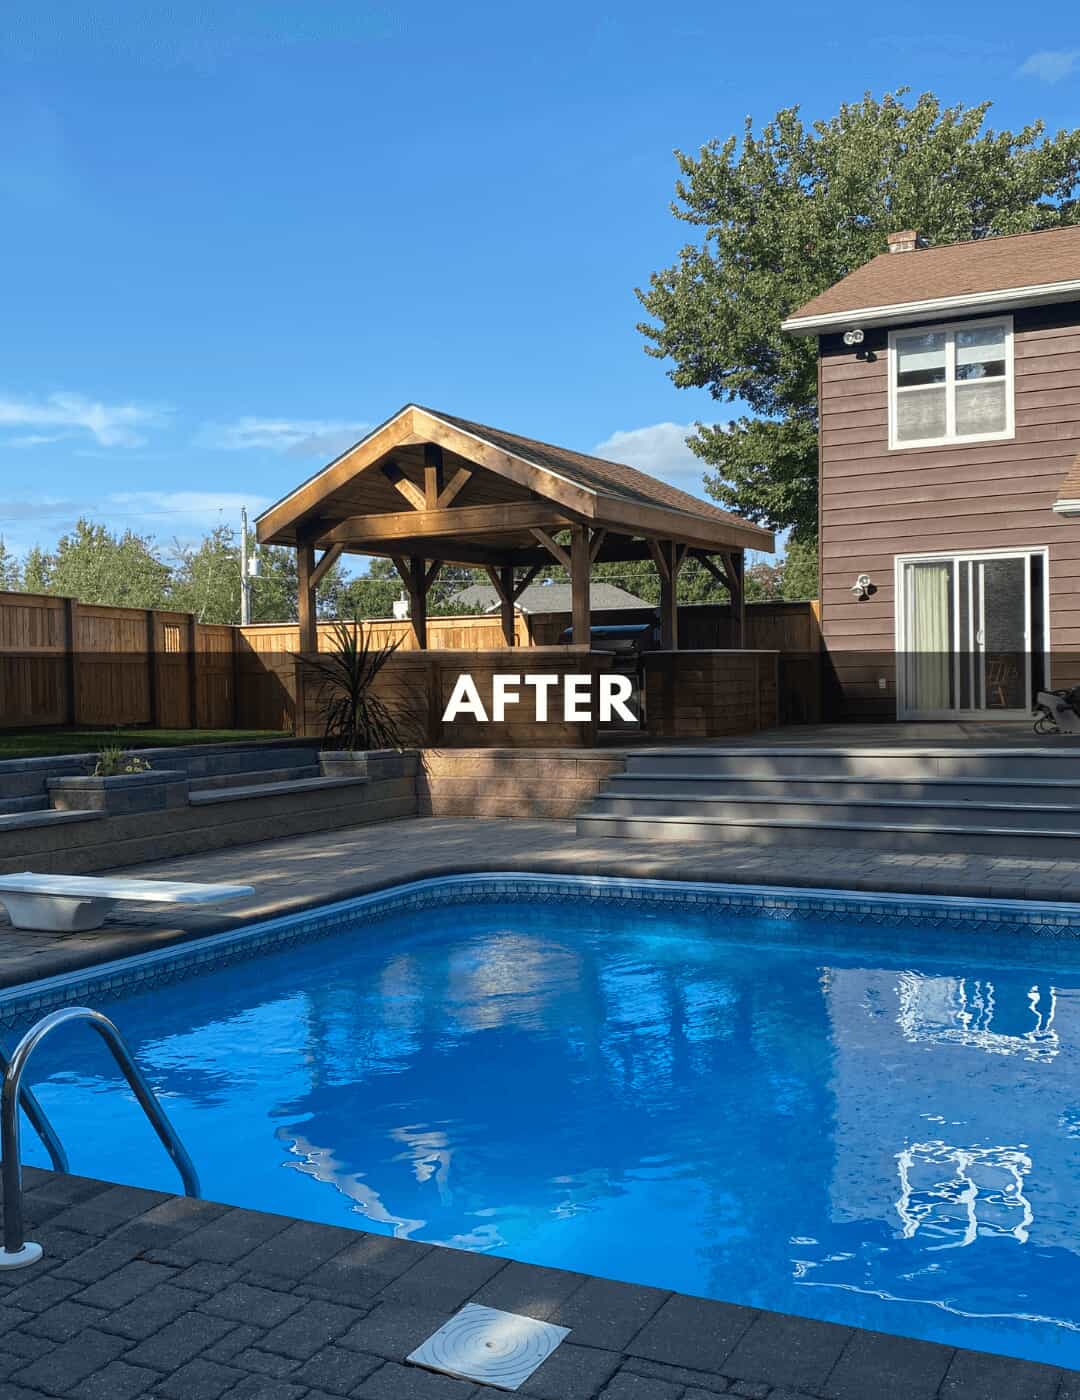 After photo of the outdoor kitchen, retaining wall, and deck, as viewed from pool side